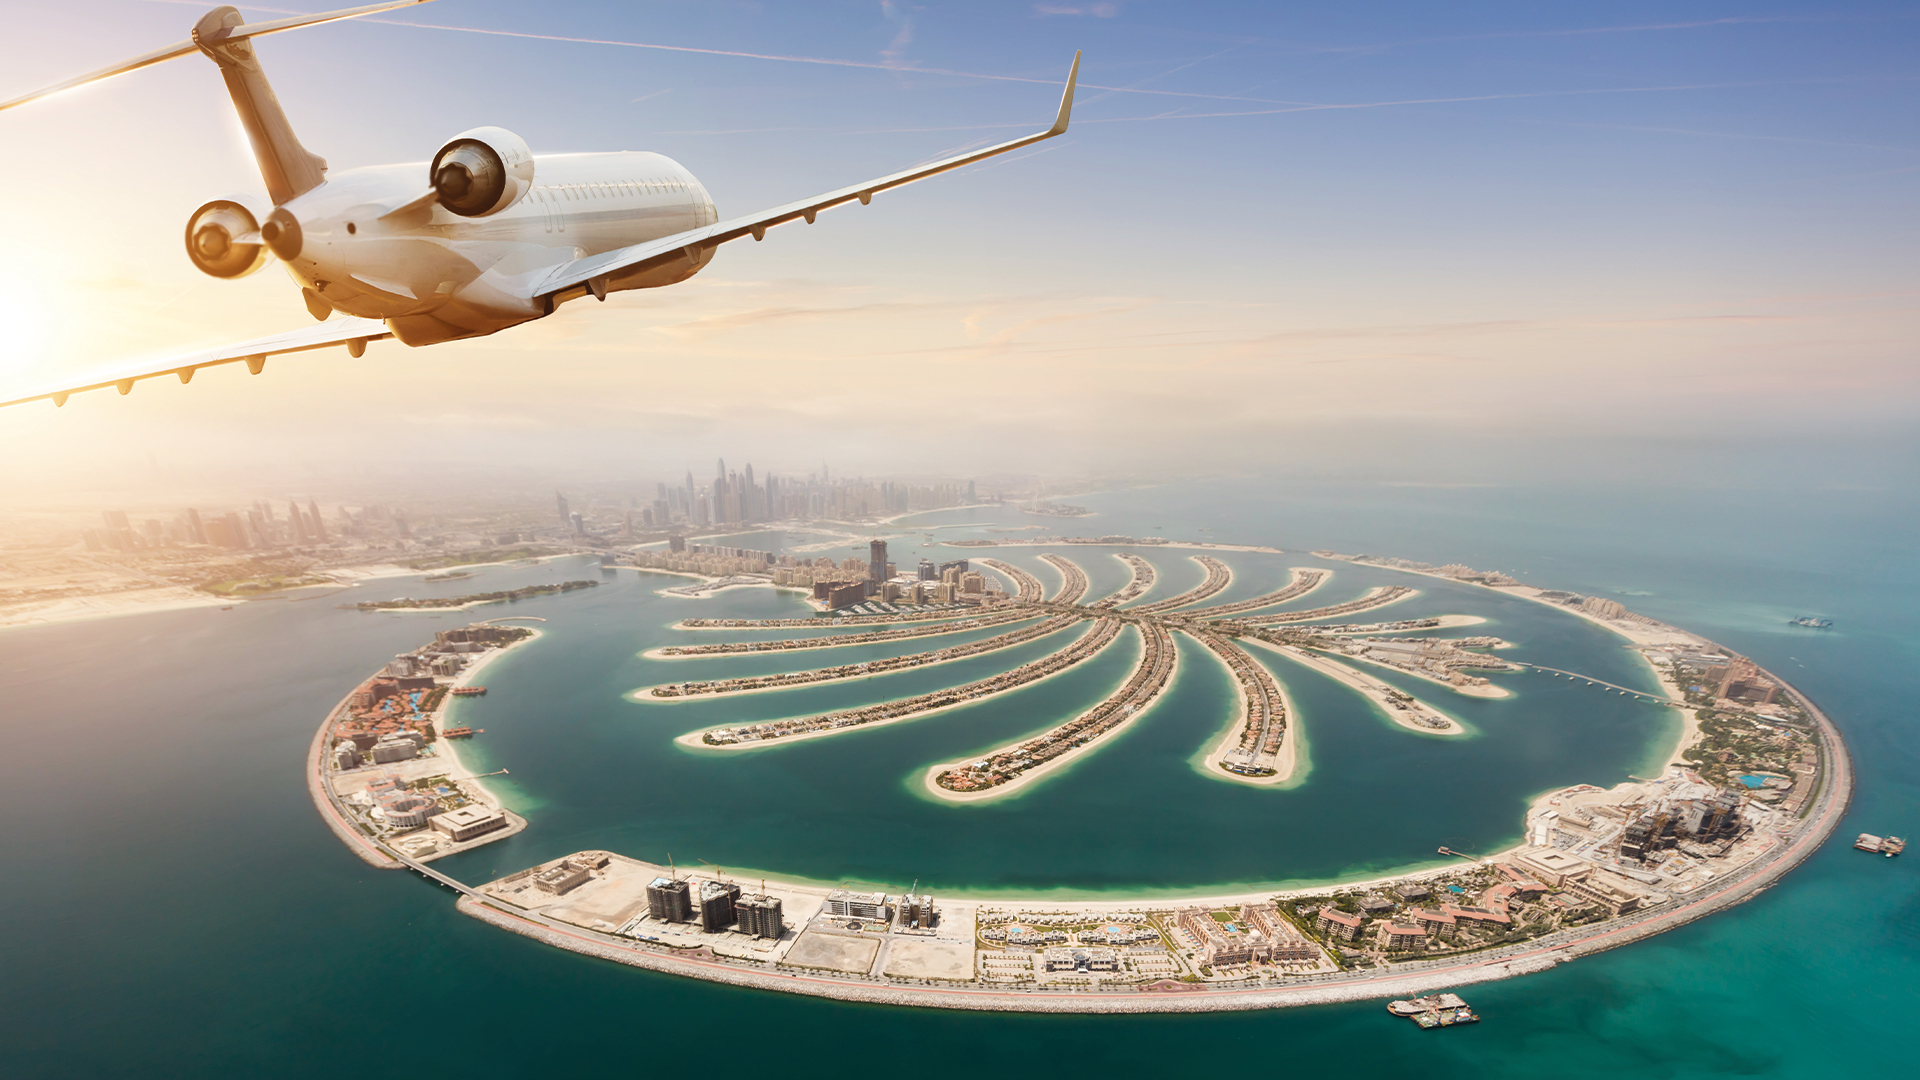 Offering dedicated chartered travel to and from Dubai, enabling focus and awareness